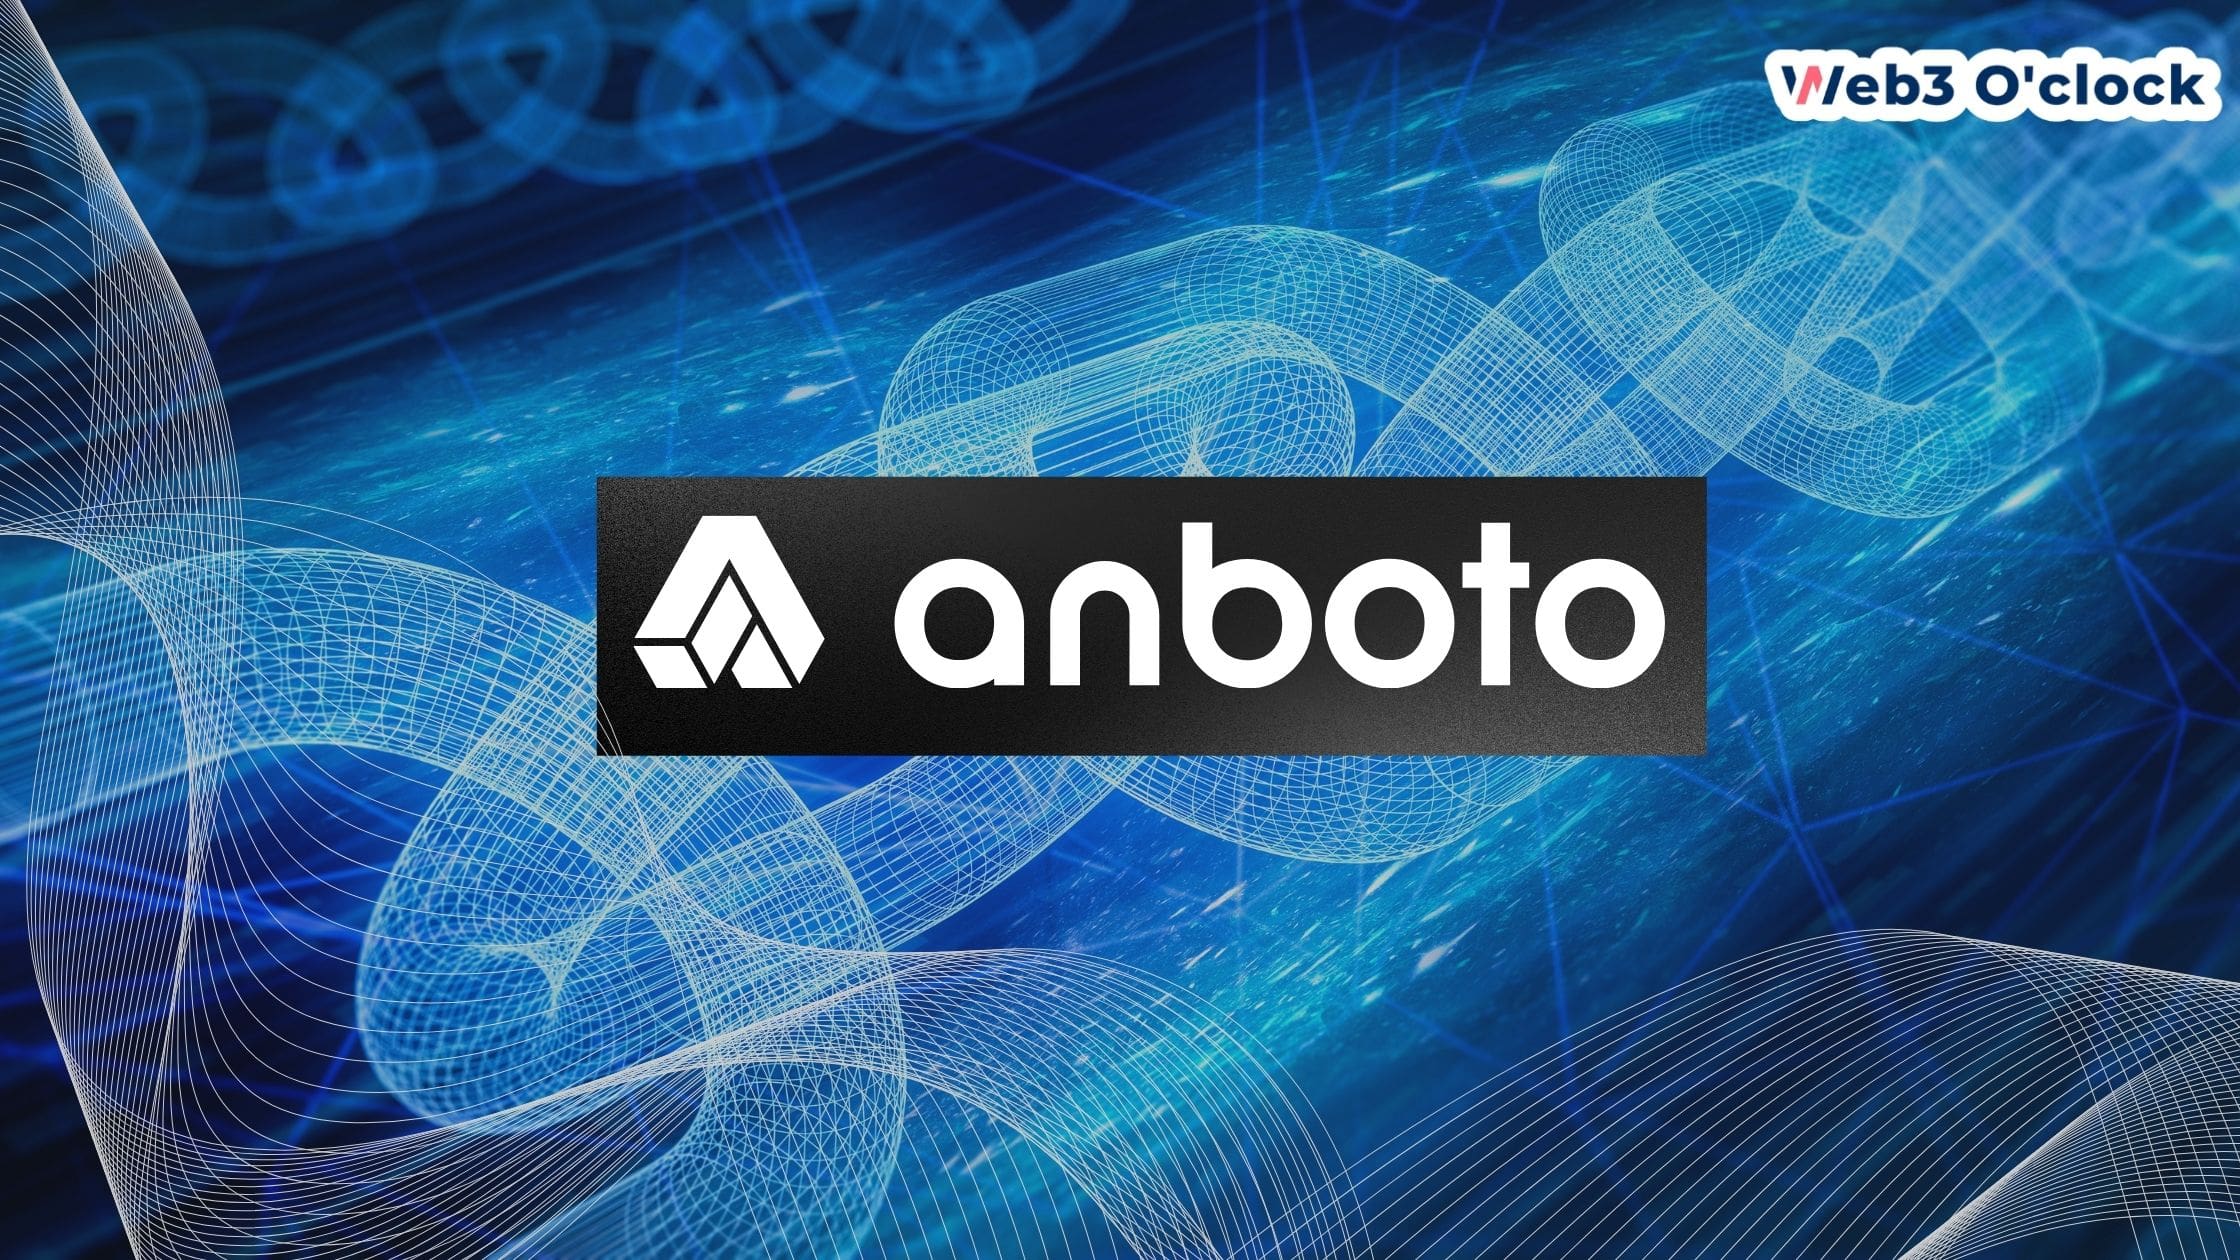 Anboto Labs Secures $3 Million by web3oclock